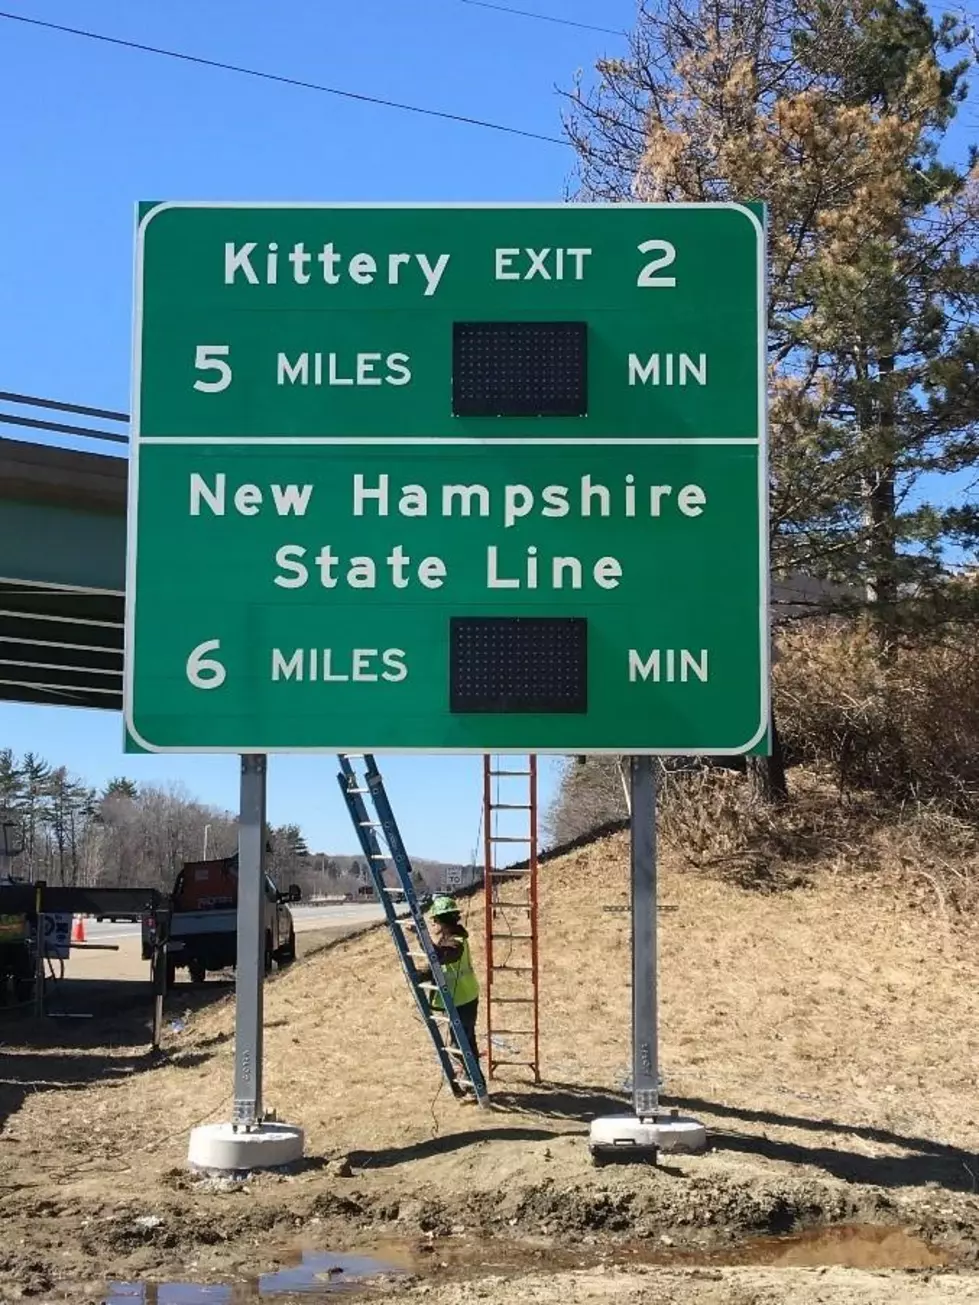 Will These Road New Road Signs Really Make Us Feel Any Better?